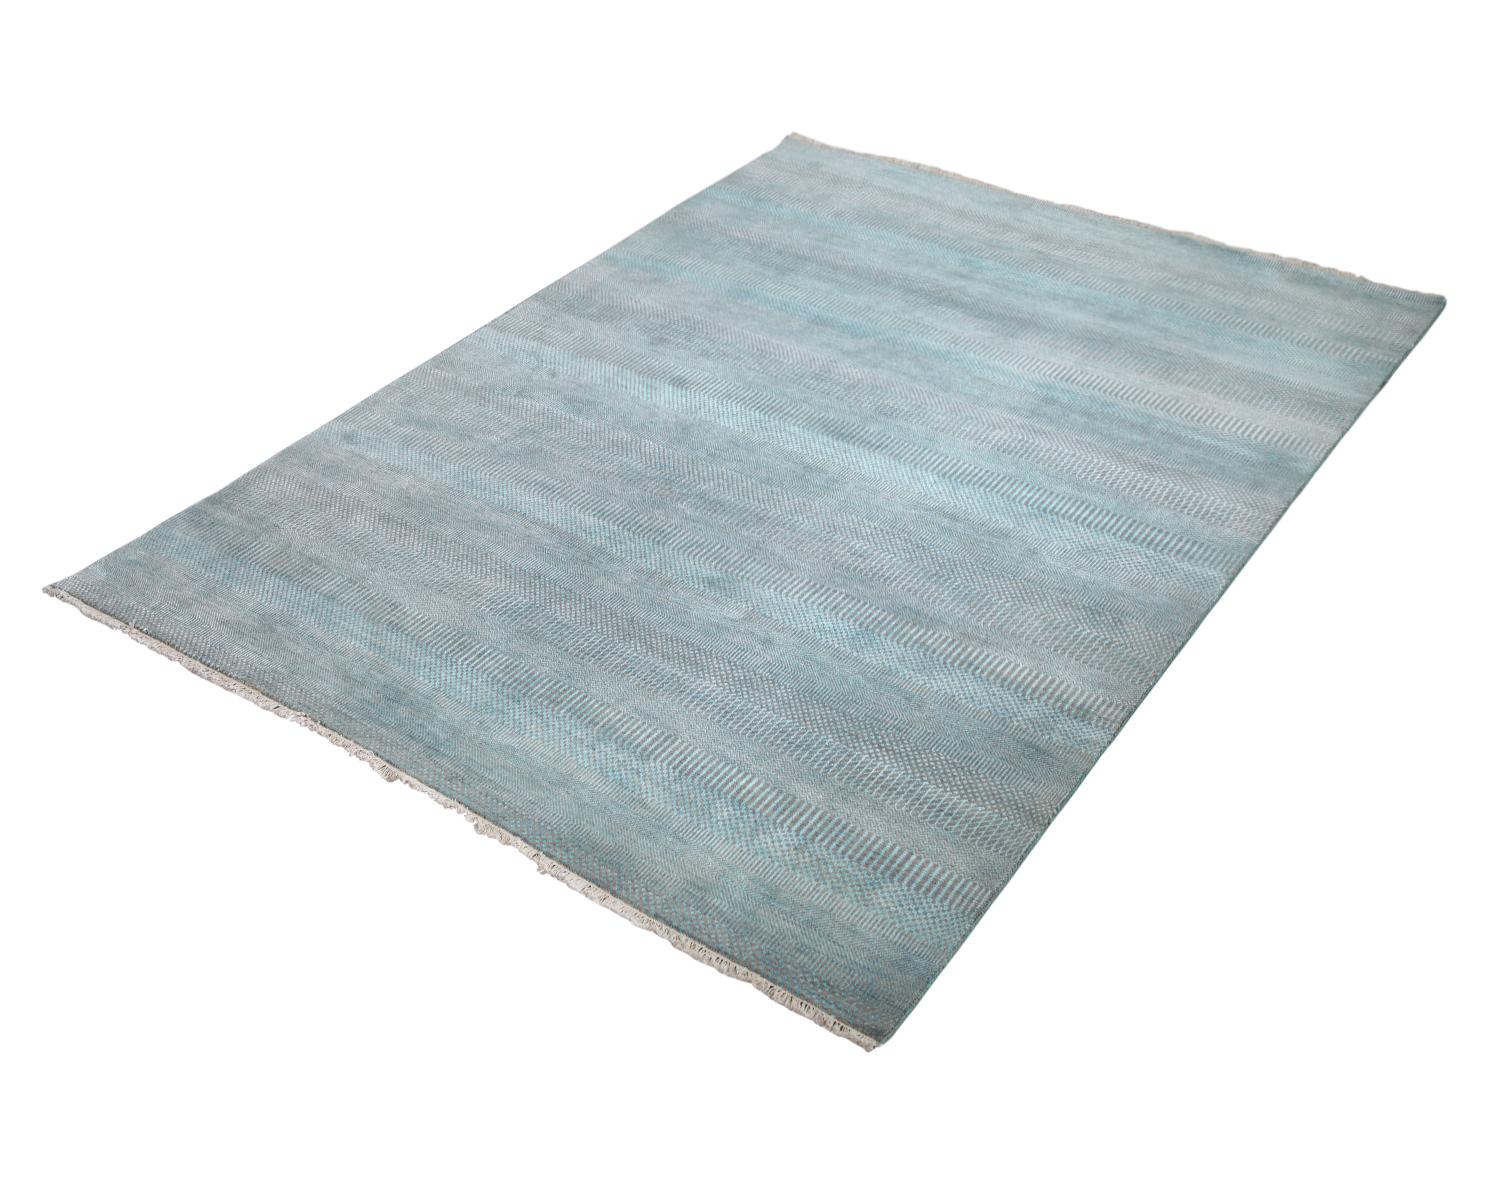 Solid Handmade Area Rug in Gray Wool and Viscose Blend 1